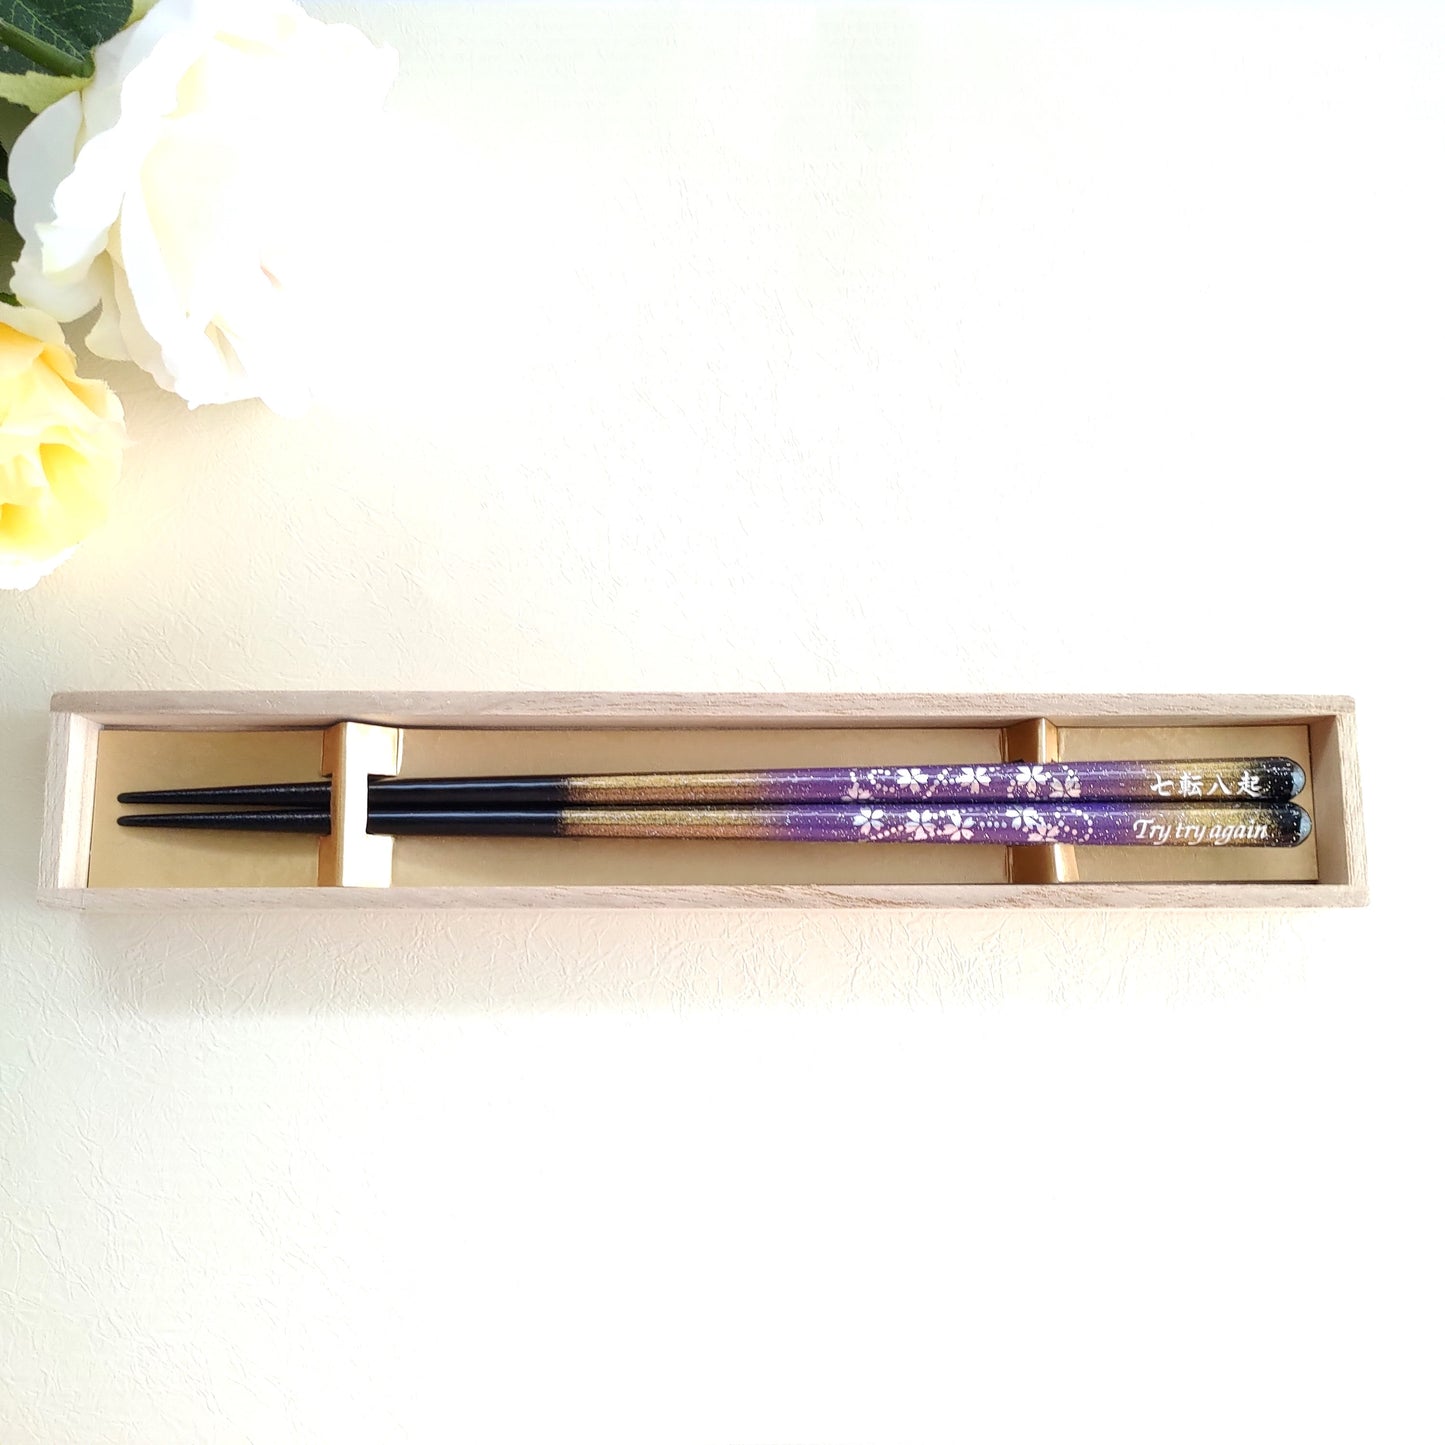 Silver blossoms dance Japanese chopsticks black red - SINGLE PAIR WITH ENGRAVED WOODEN BOX SET